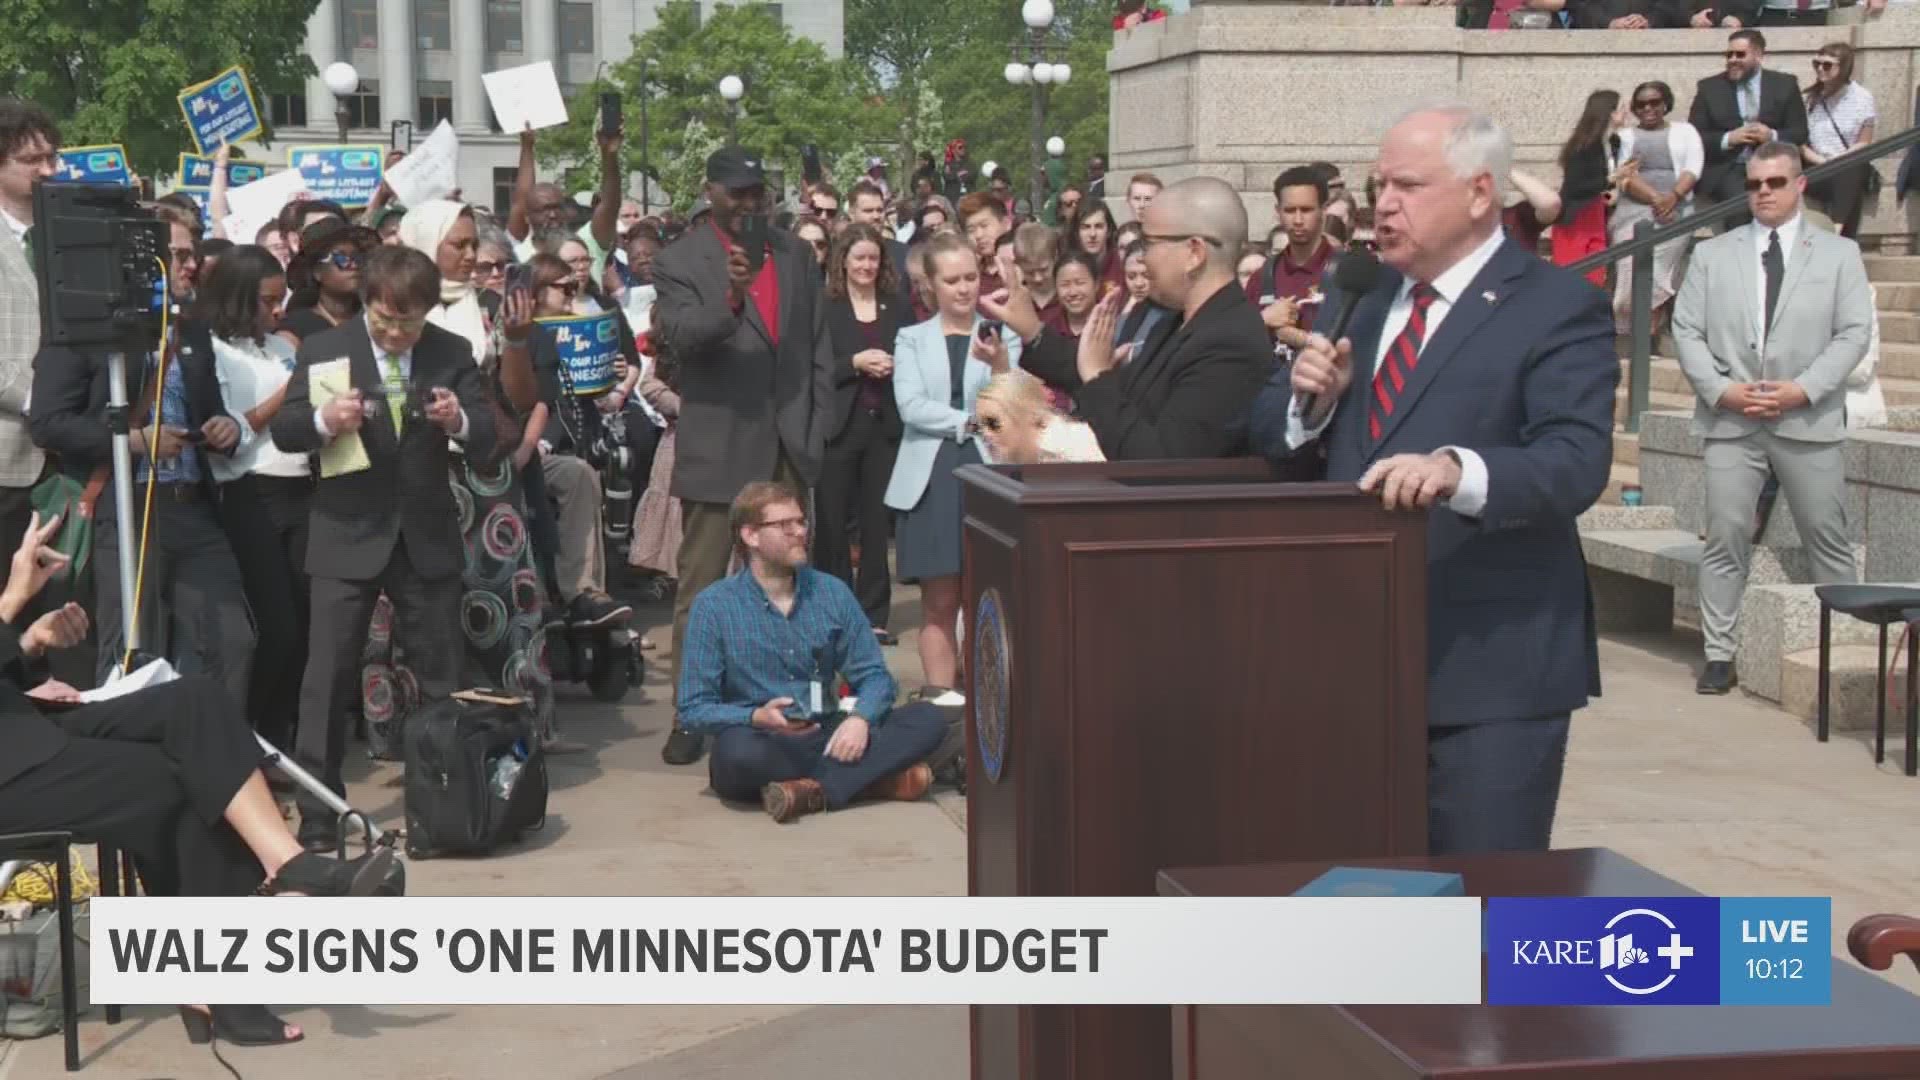 Twelve separate bills make up the $72 billion "One Minnesota" budget signed by Gov. Walz on Wednesday, May 24.